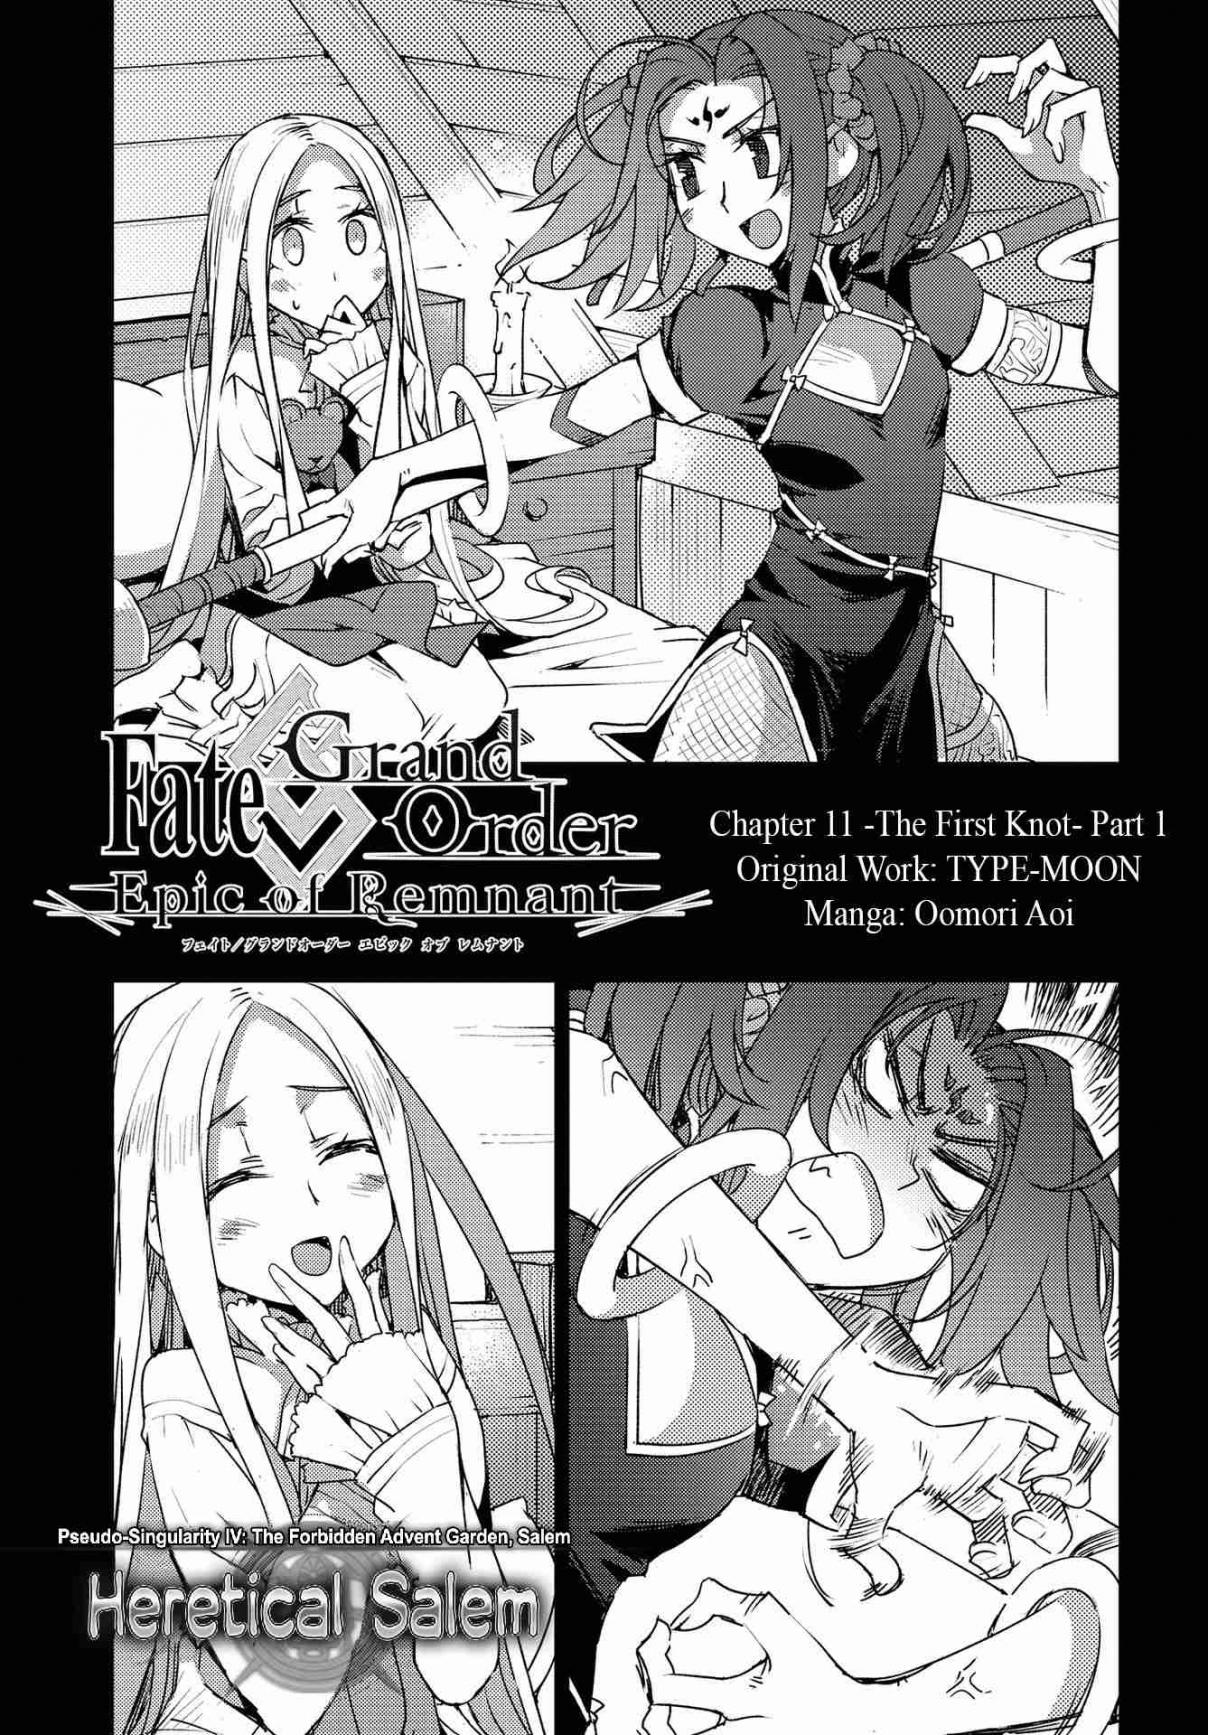 Fate/Grand Order: Epic of Remnant: Pseudo Singularity IV: The Forbidden Advent Garden, Salem Heretical Salem Ch. 11 The First Knot 1